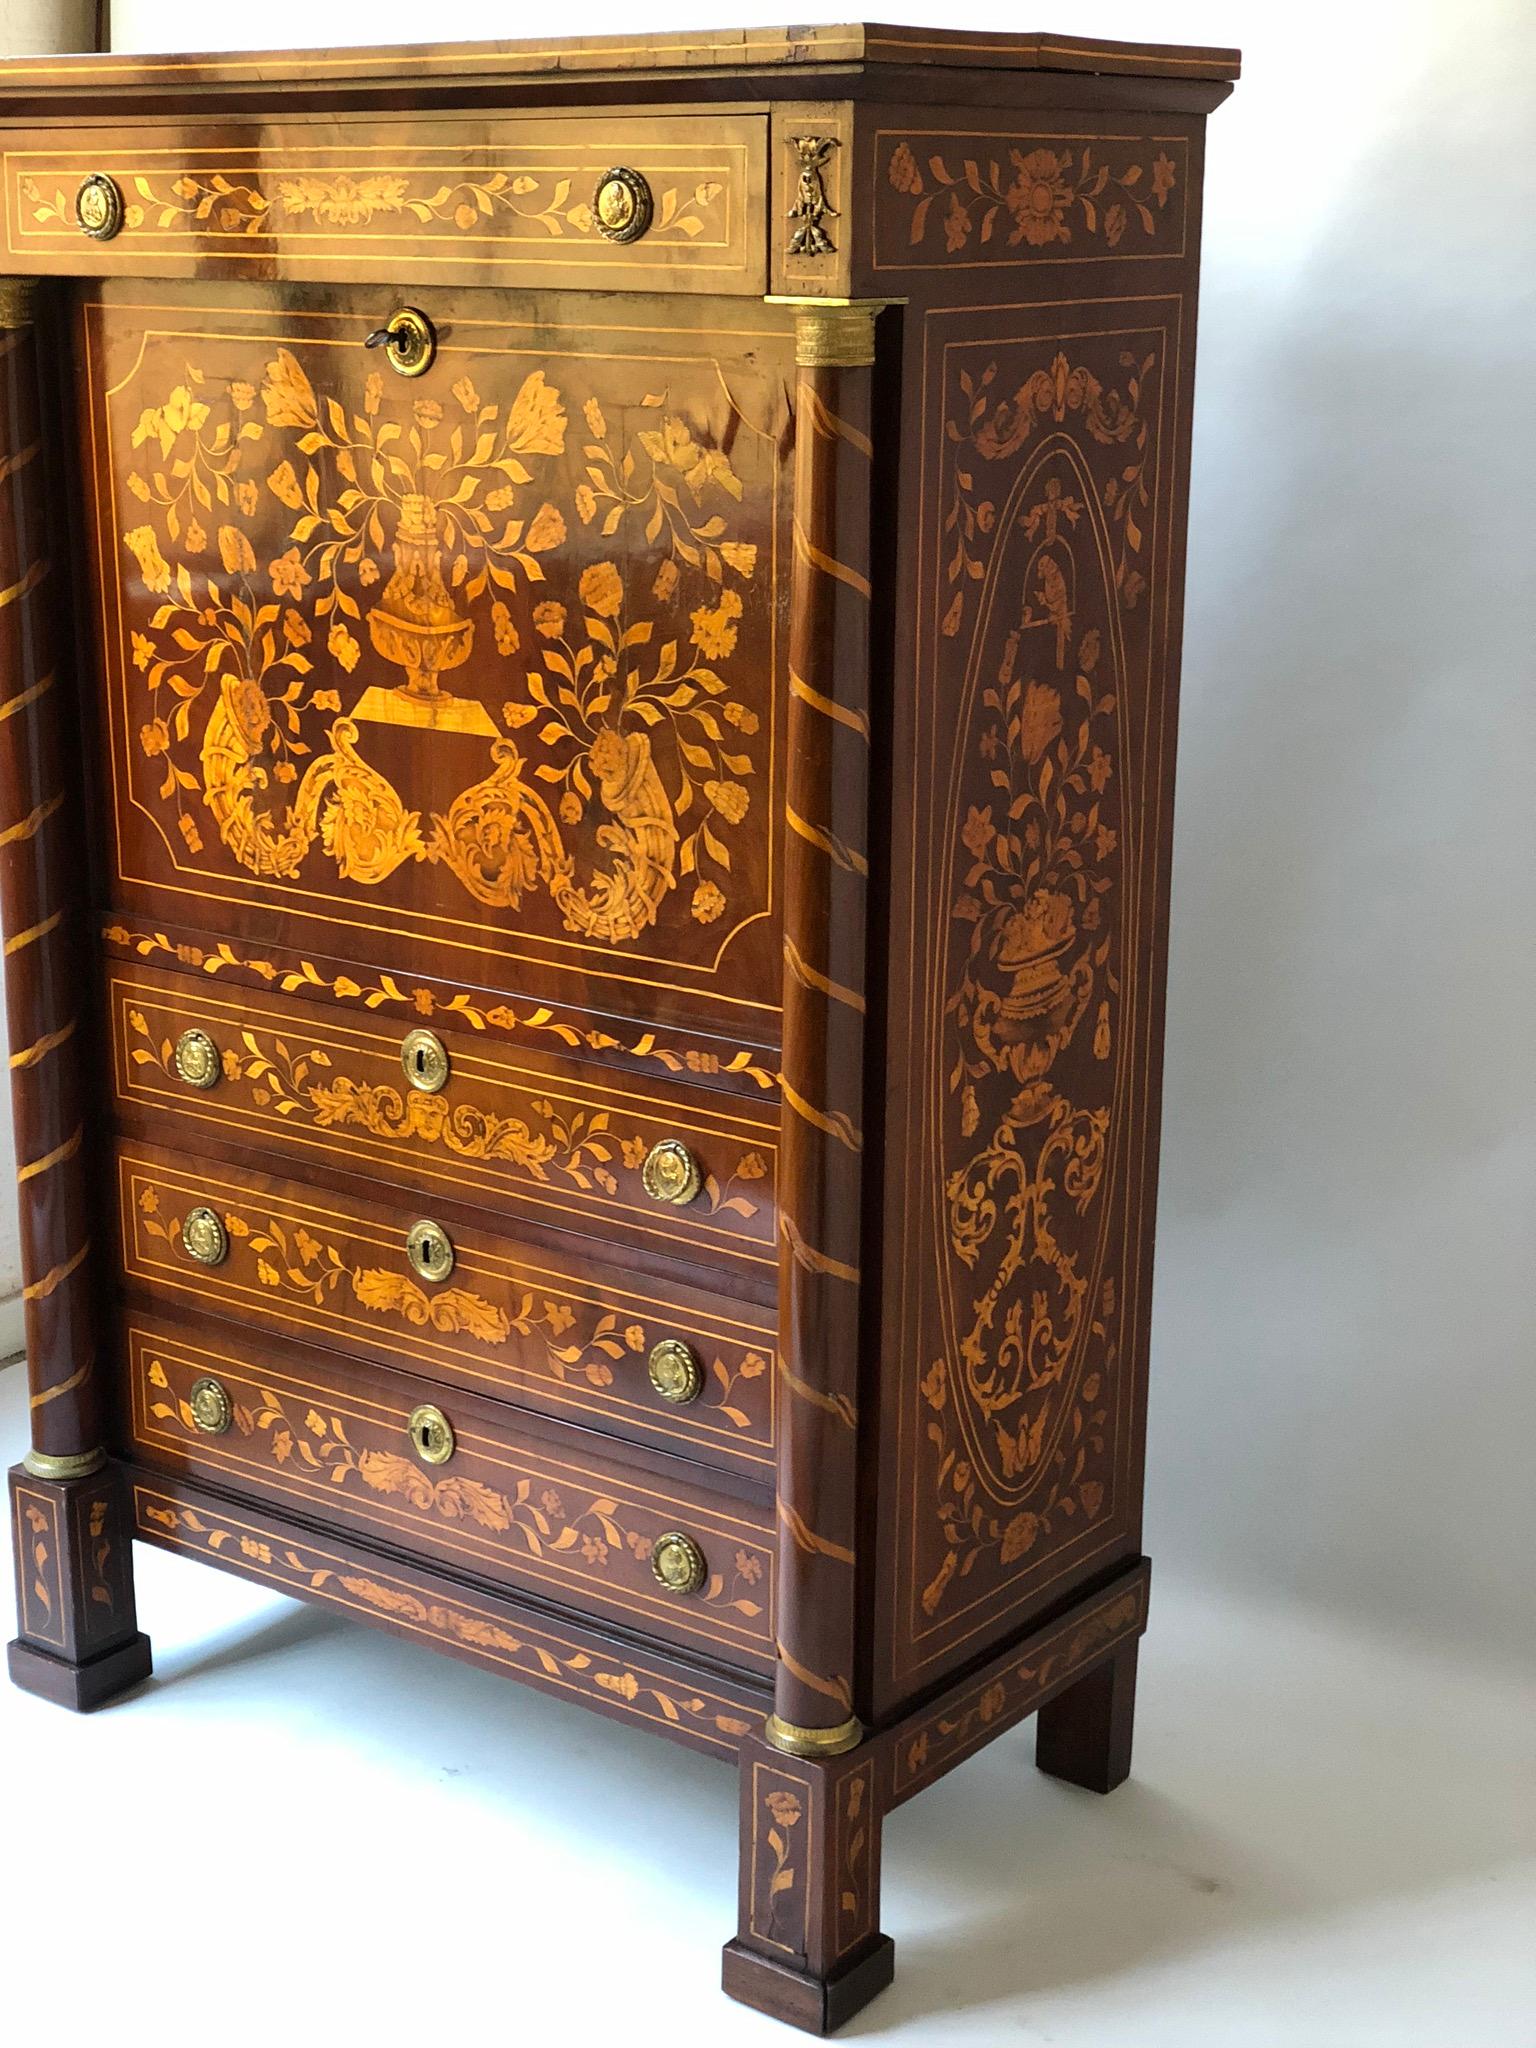 An early 19th century Dutch mahogany and satinwood foliate marquetry secretaire a abattant with fall front enclosing a well fitted interior of short drawers and gilt tooled green leather writing surface(which holds solidly at the horizontal and